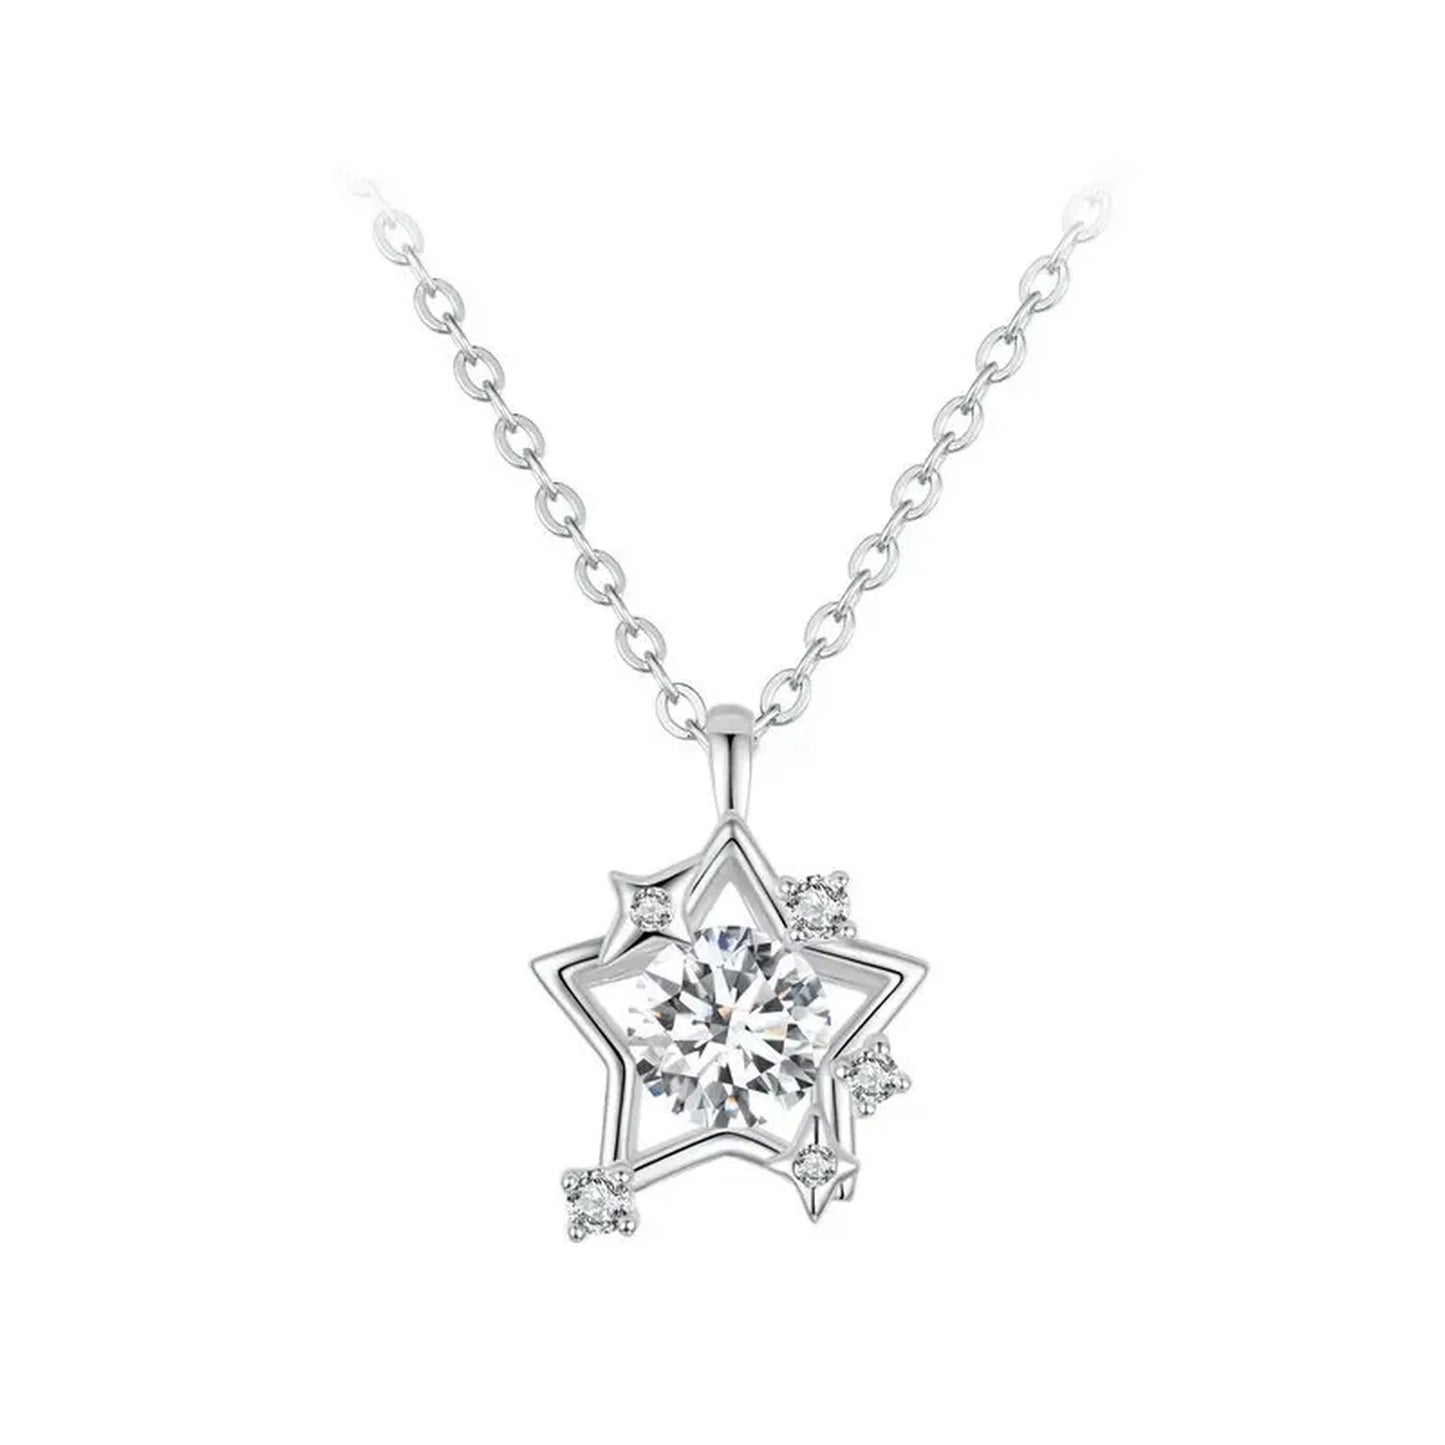 PAHALA 925 Strling Silver Clear CZ Shiny Star With Crystals Pendant Necklace